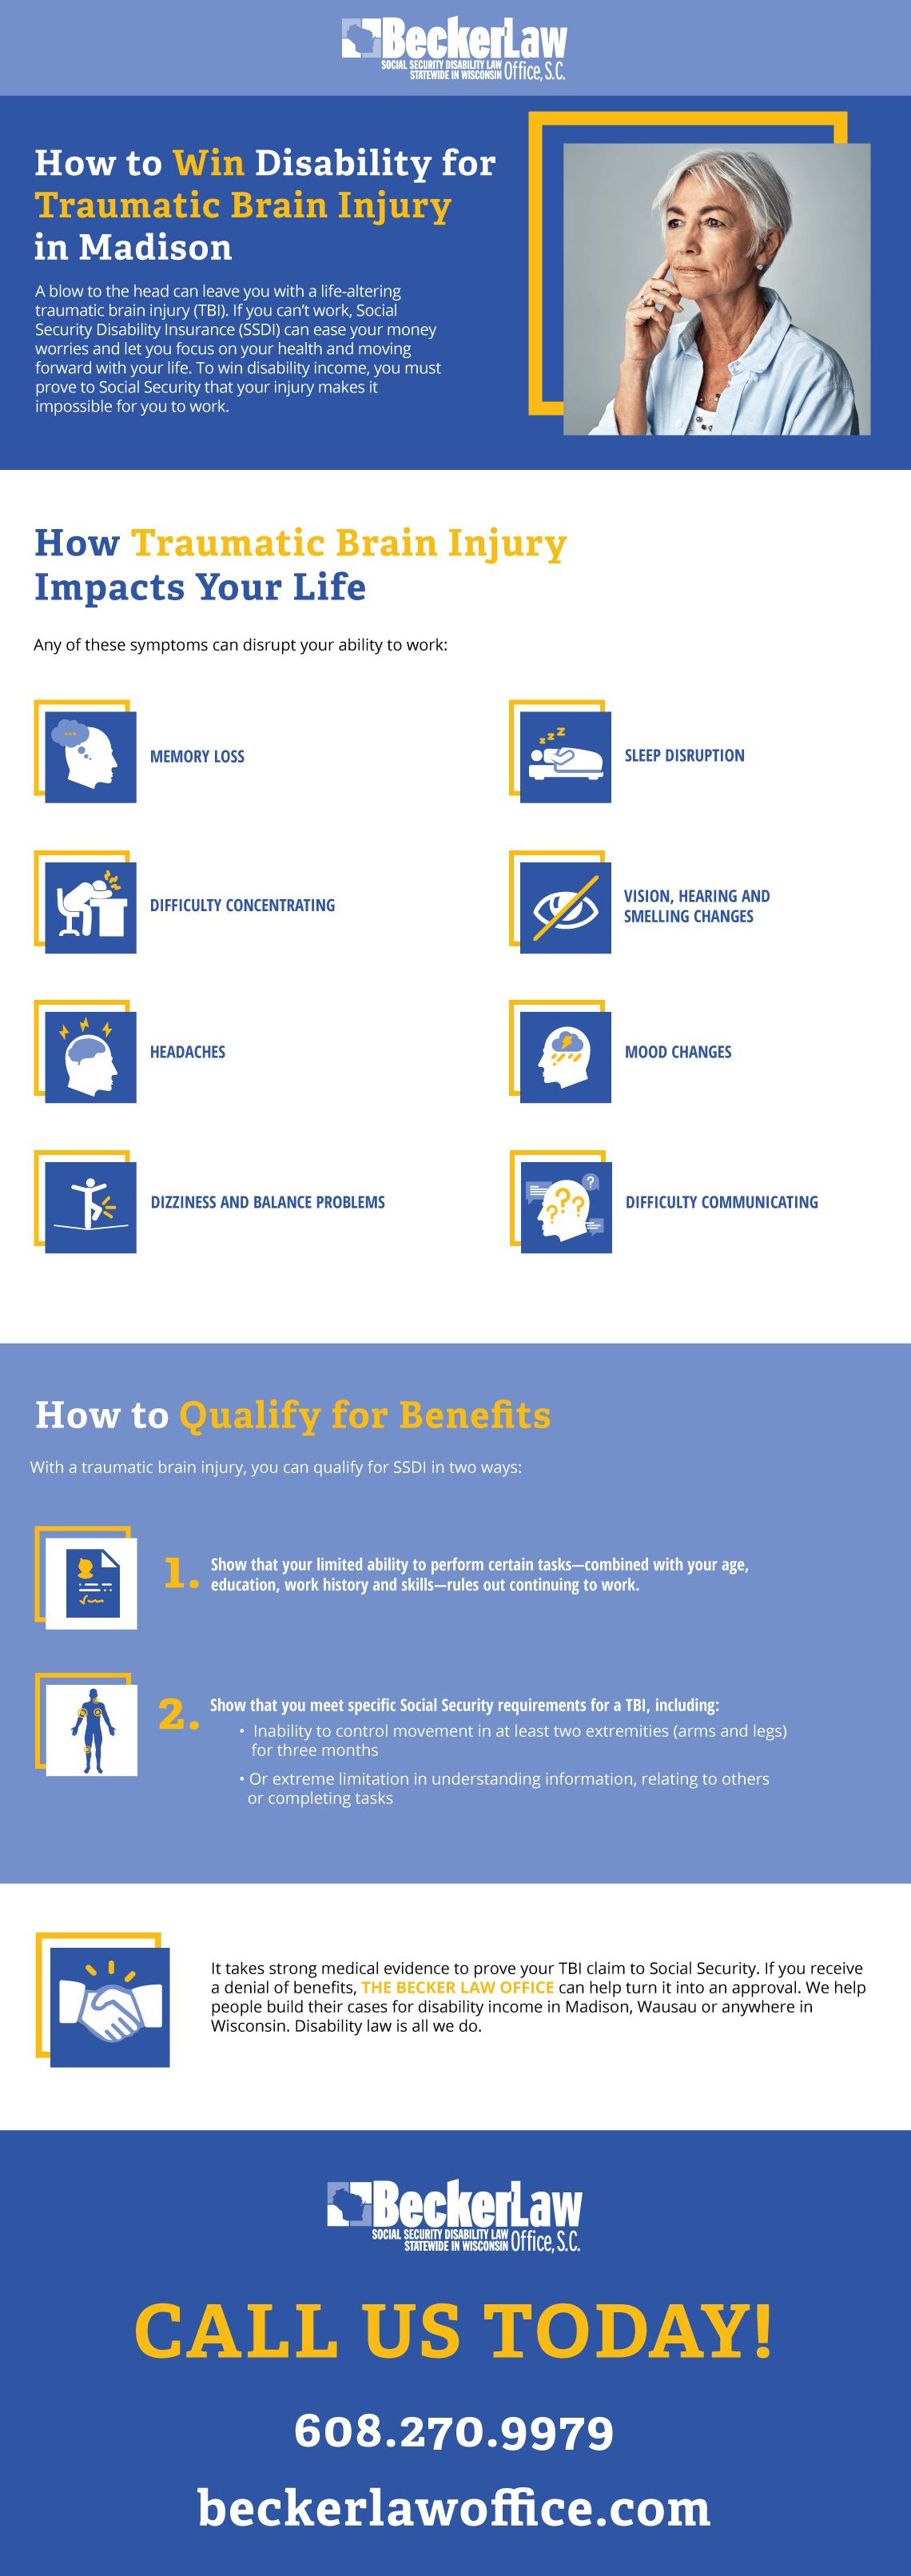 An infographic detailing how to win disability benefits for traumatic brain injuries.